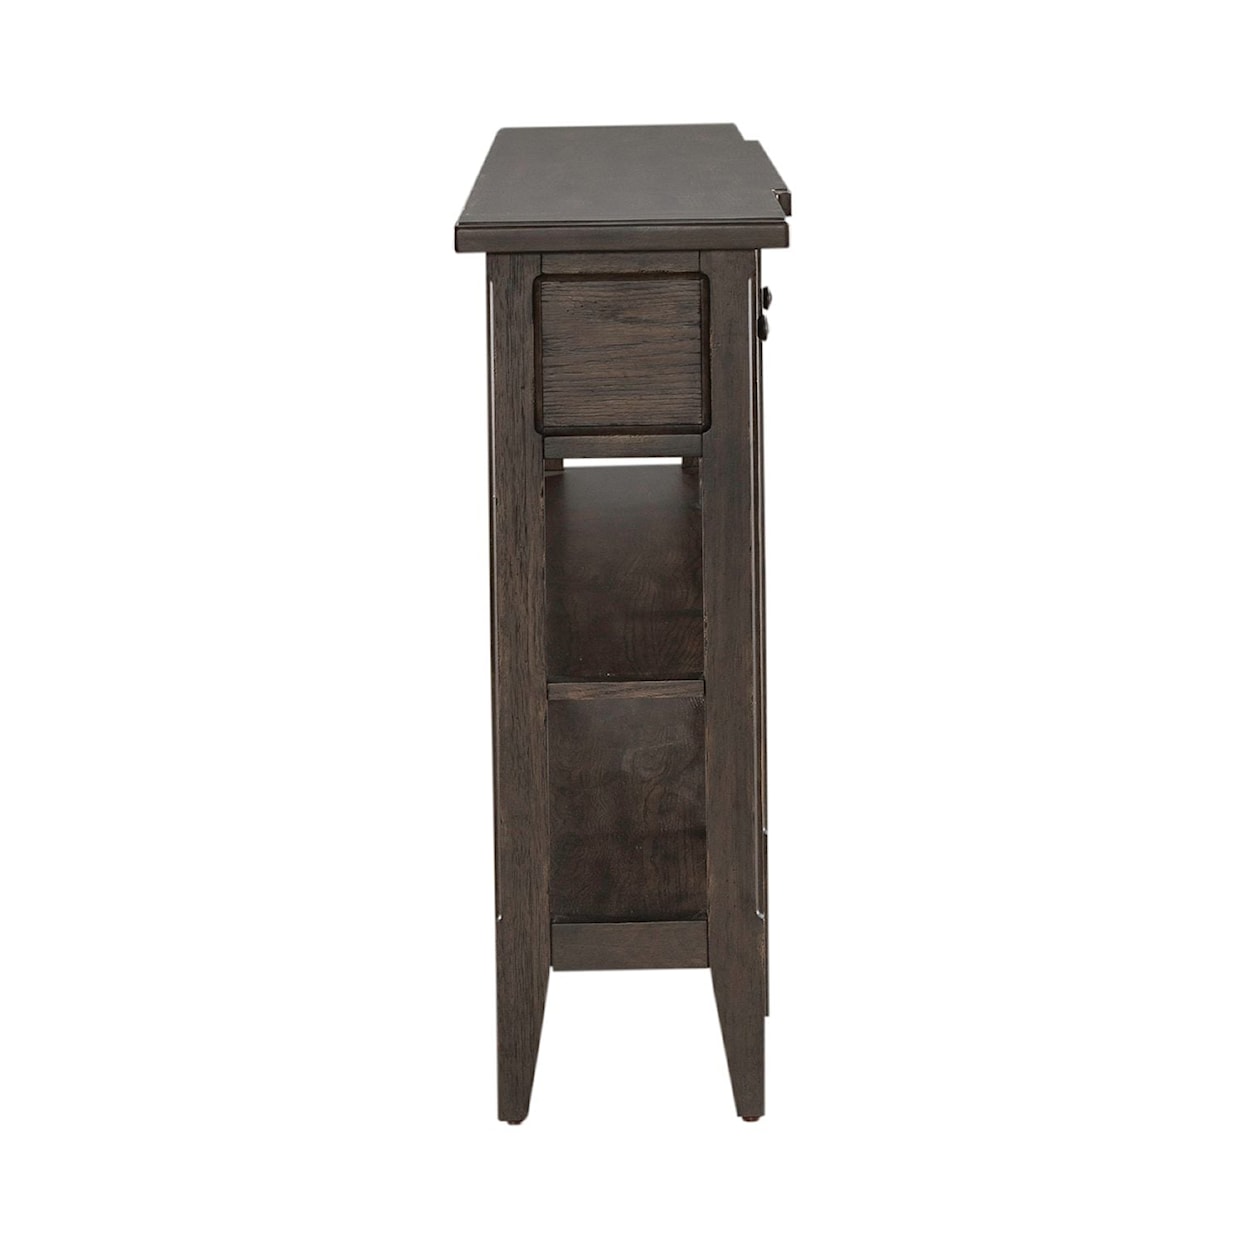 Liberty Furniture Paradise Valley Hall Console Table